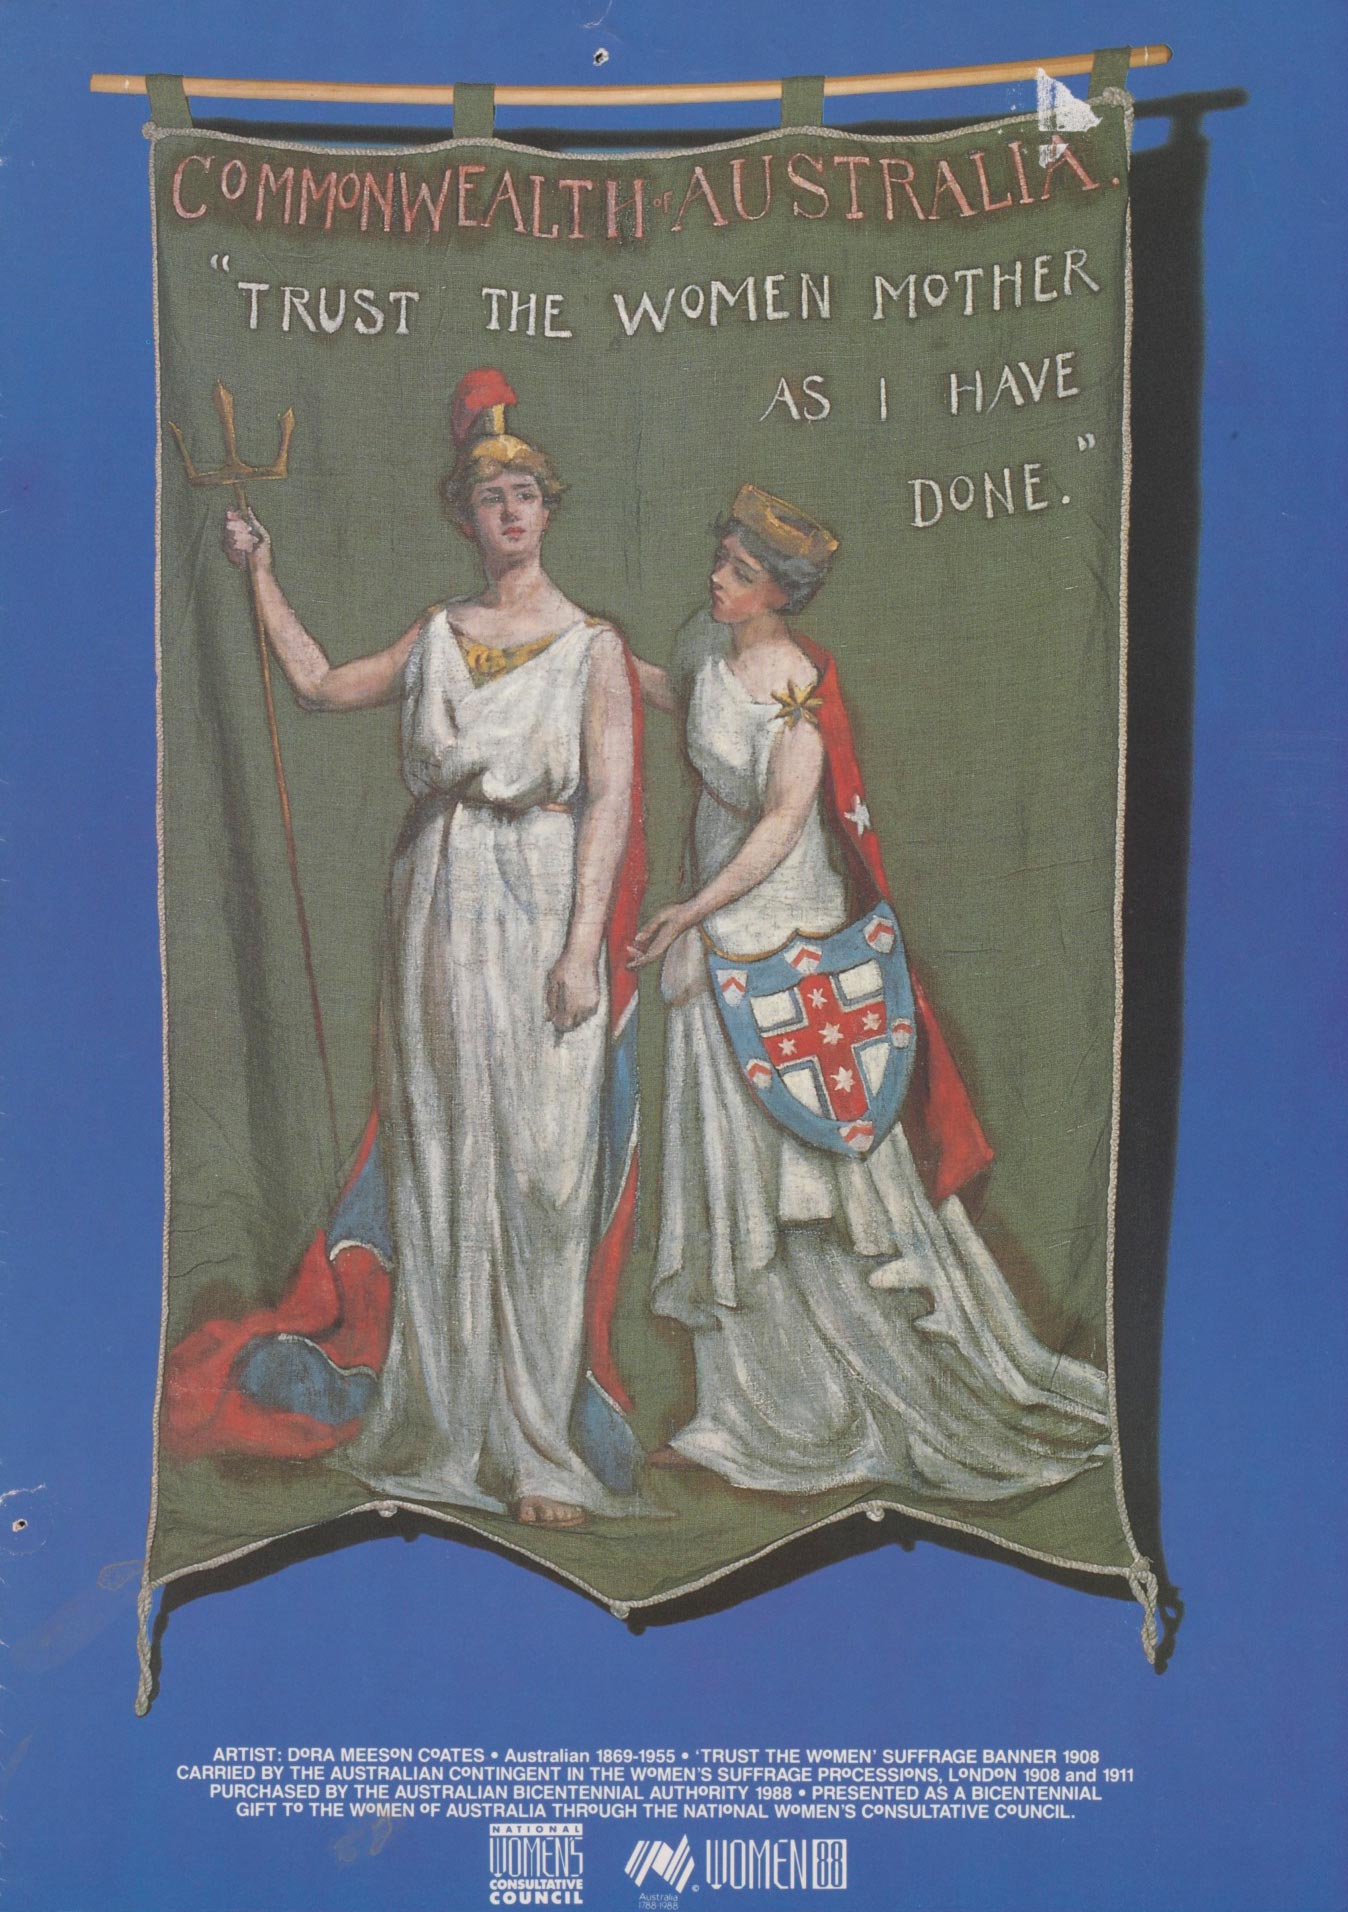 <p>Banner encouraging the United Kingdom to give women the vote, by Dora Meeson Coates, 1908</p>
